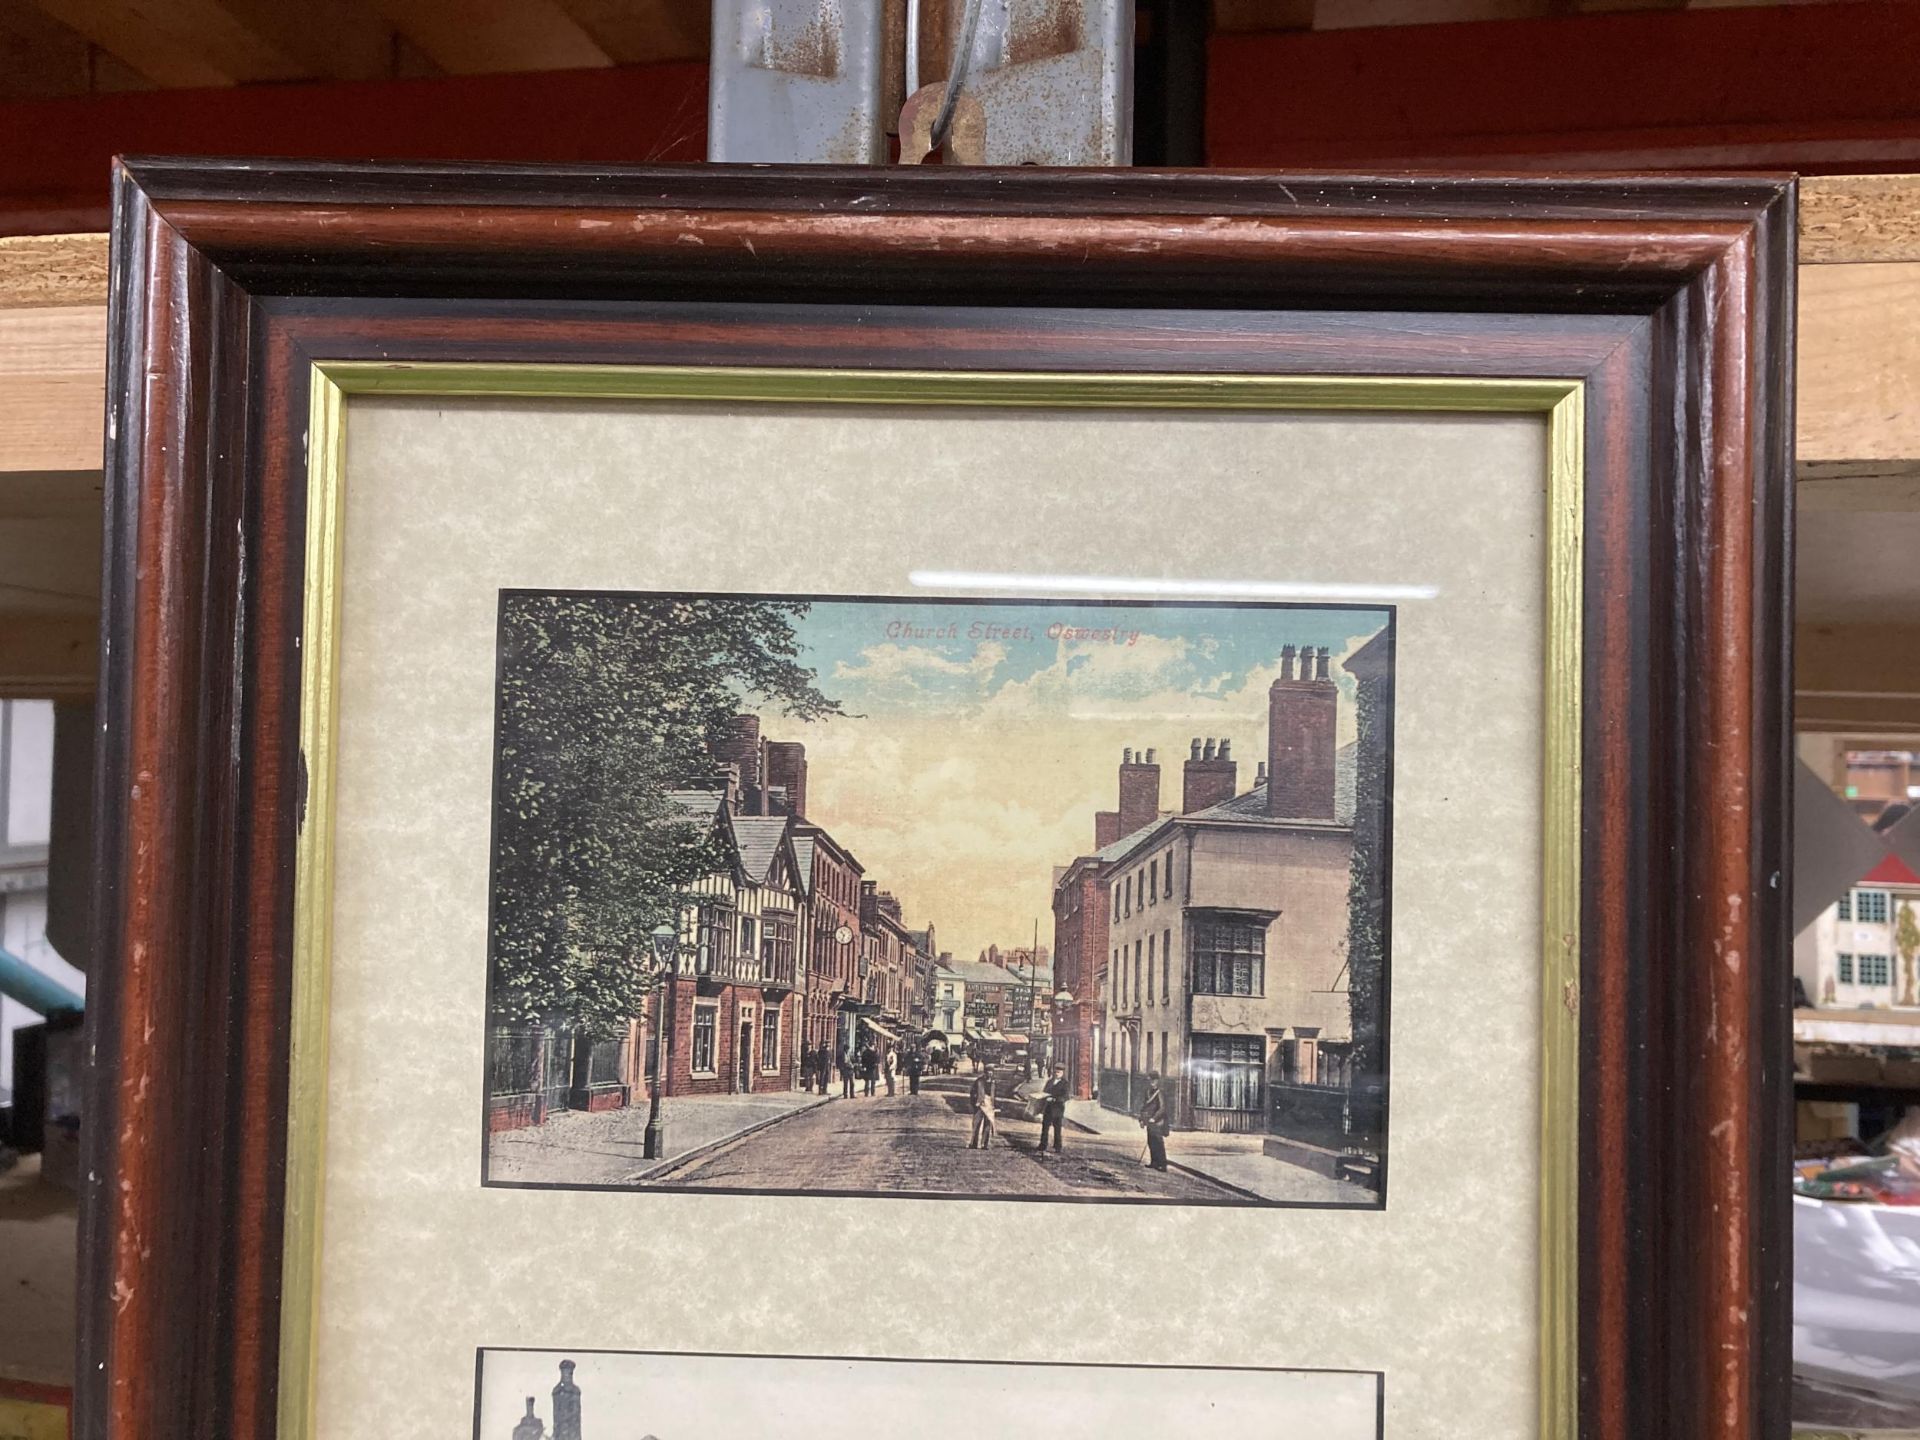 TWO FRAMED MONTAGES OF PHOTOGRAPHIC PRINTS OF VINTAGE OSWESTRY - Image 4 of 4